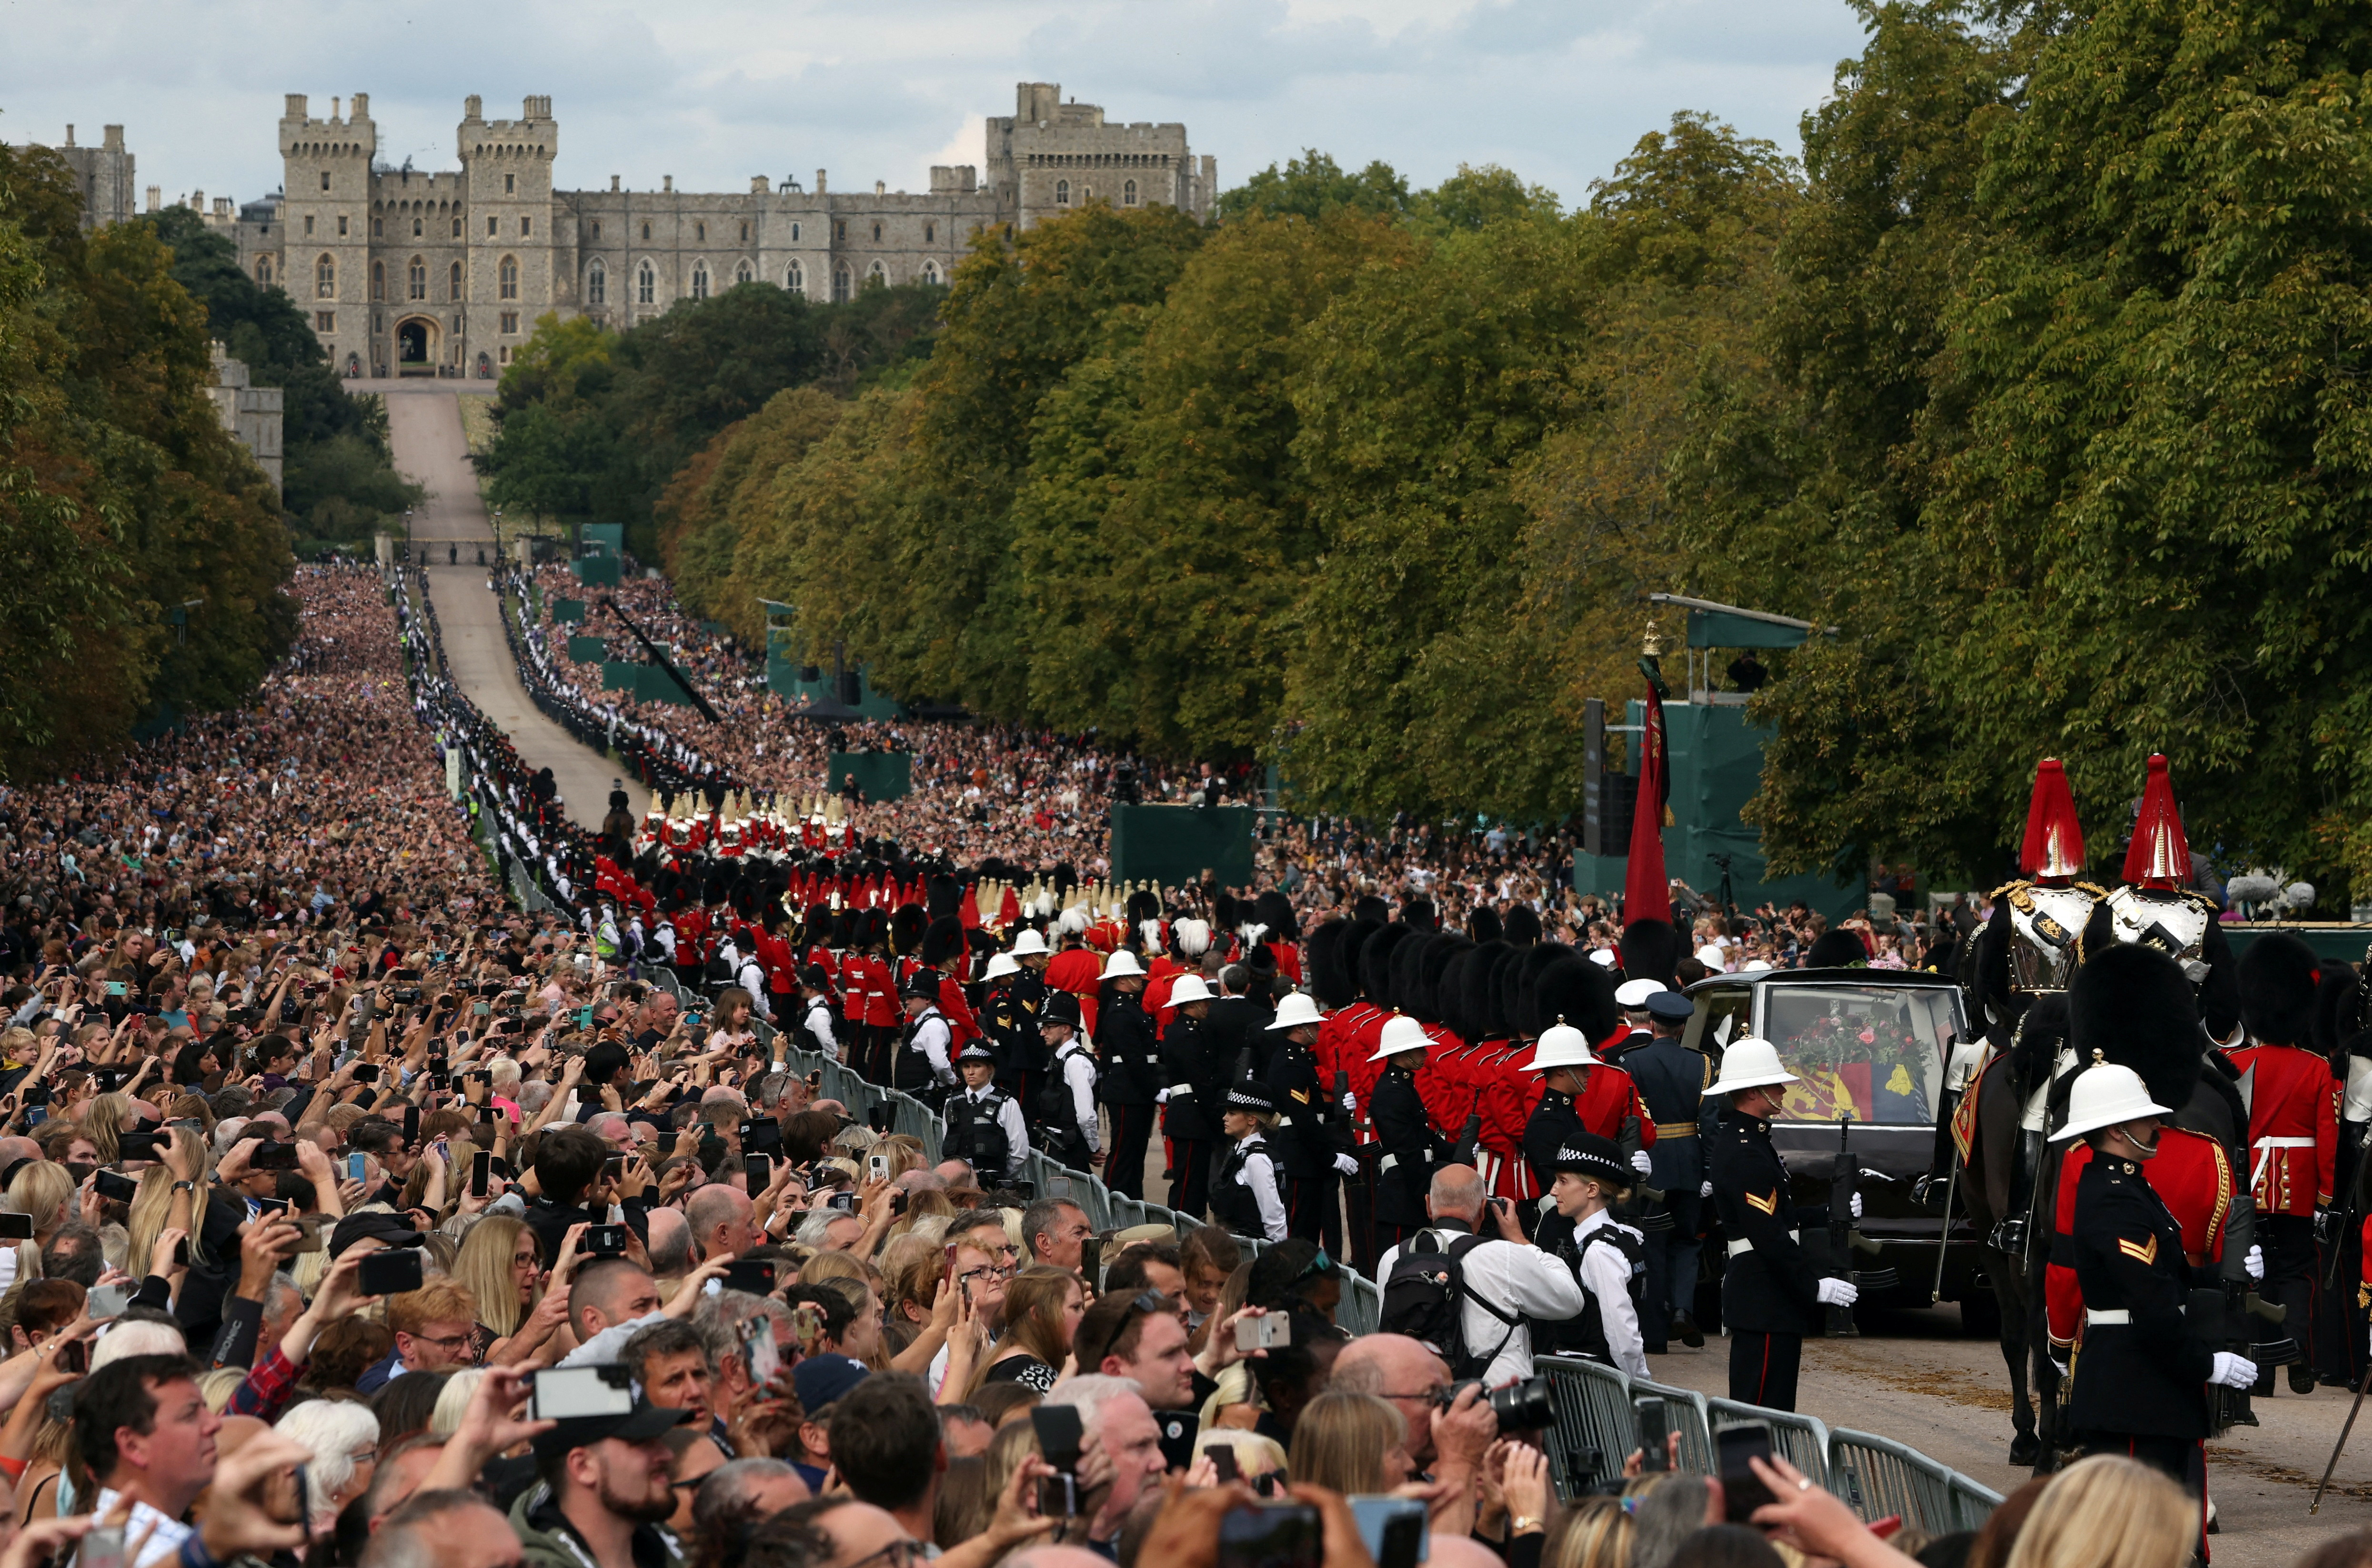 image How the Queen’s queue can be seen as a modern form of pilgrimage